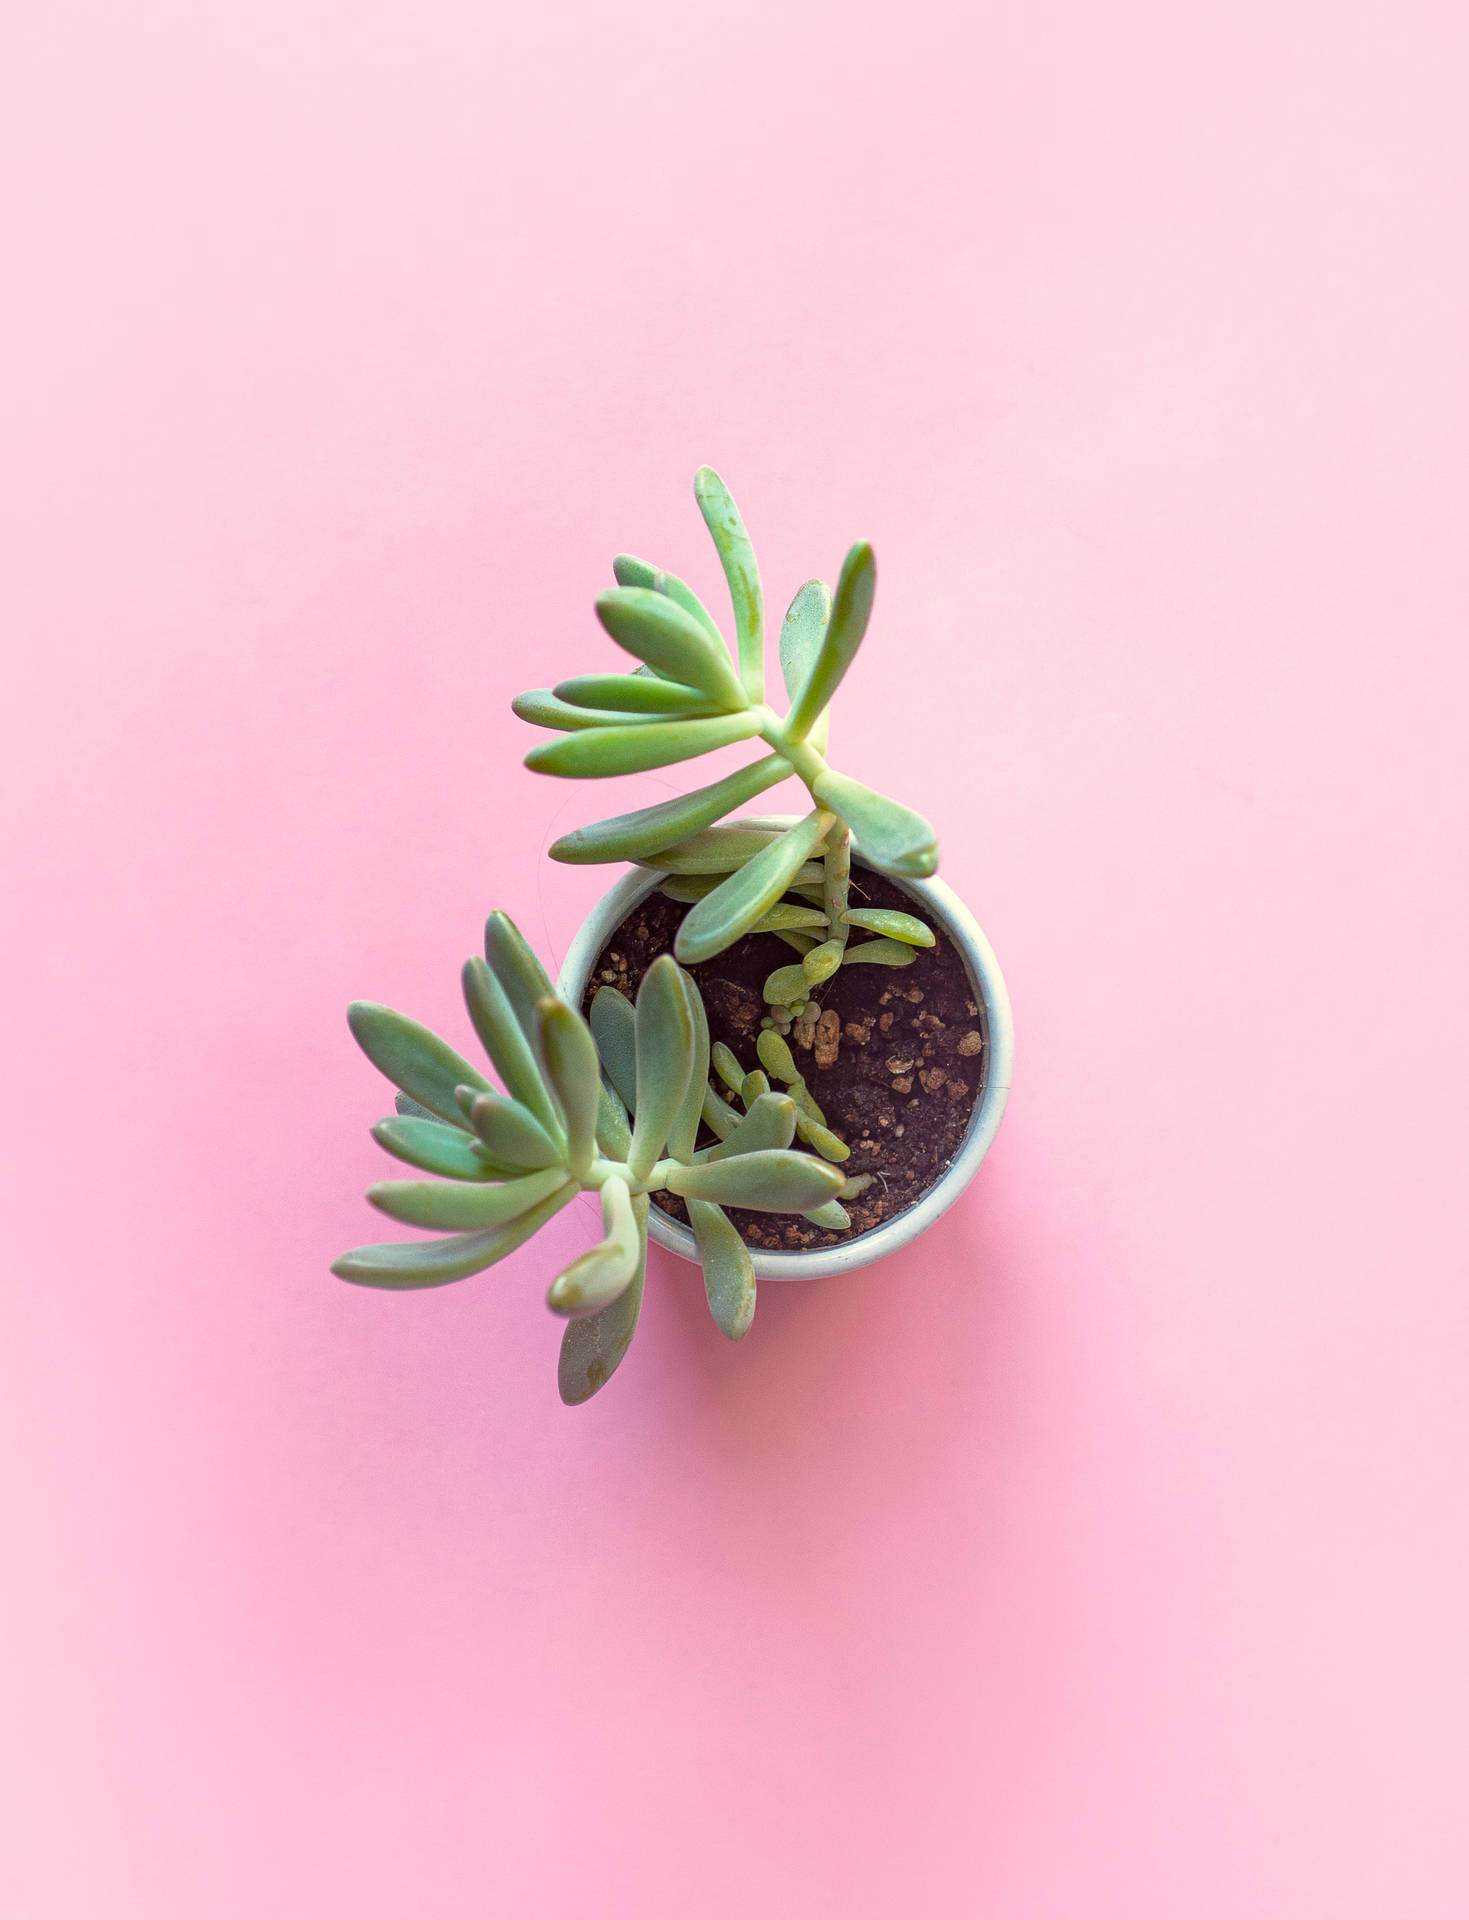 Succulent On Pastel Pink Color Table Wallpaper